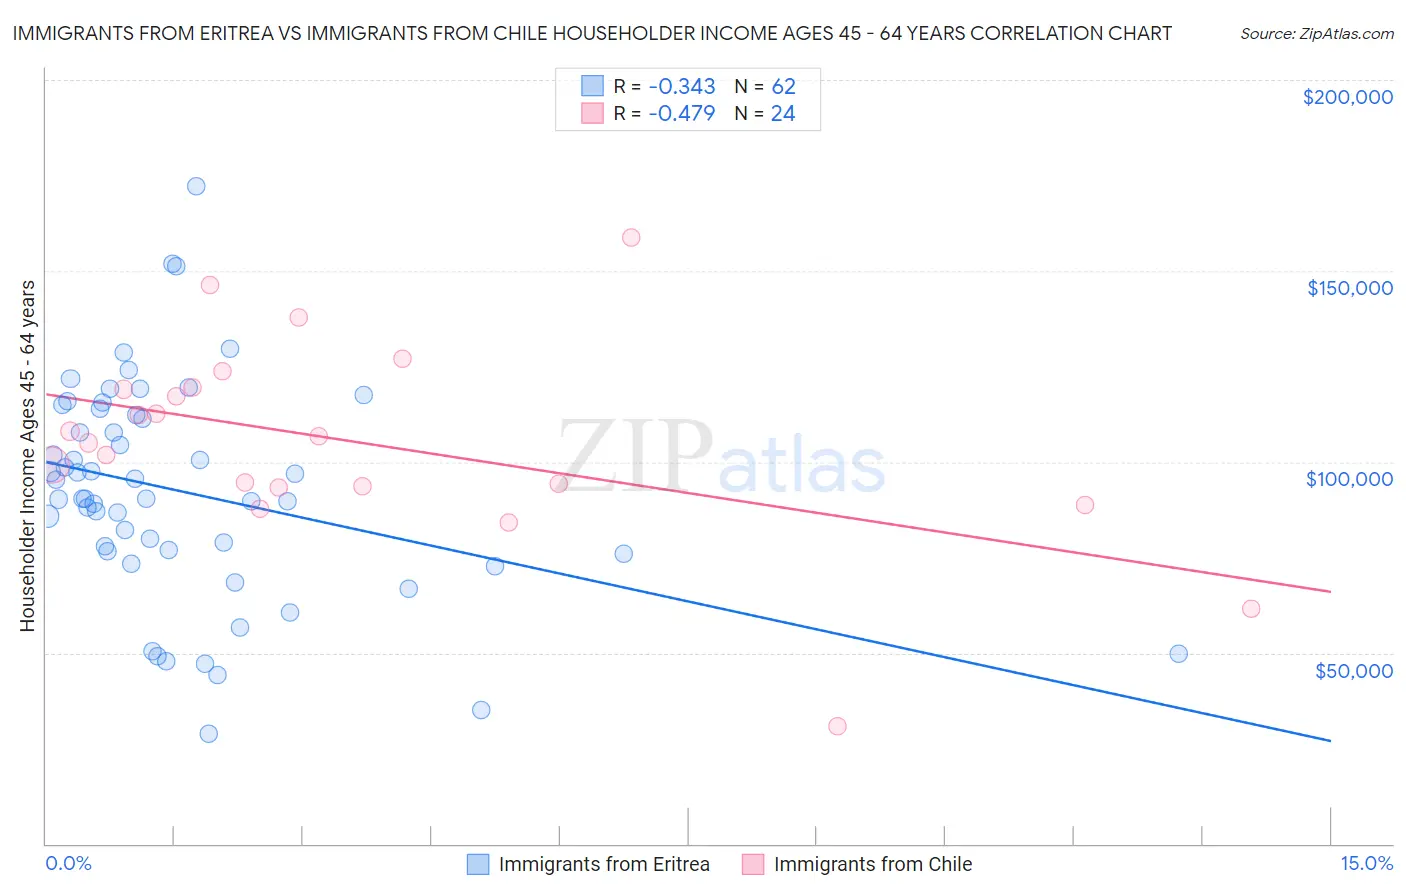 Immigrants from Eritrea vs Immigrants from Chile Householder Income Ages 45 - 64 years